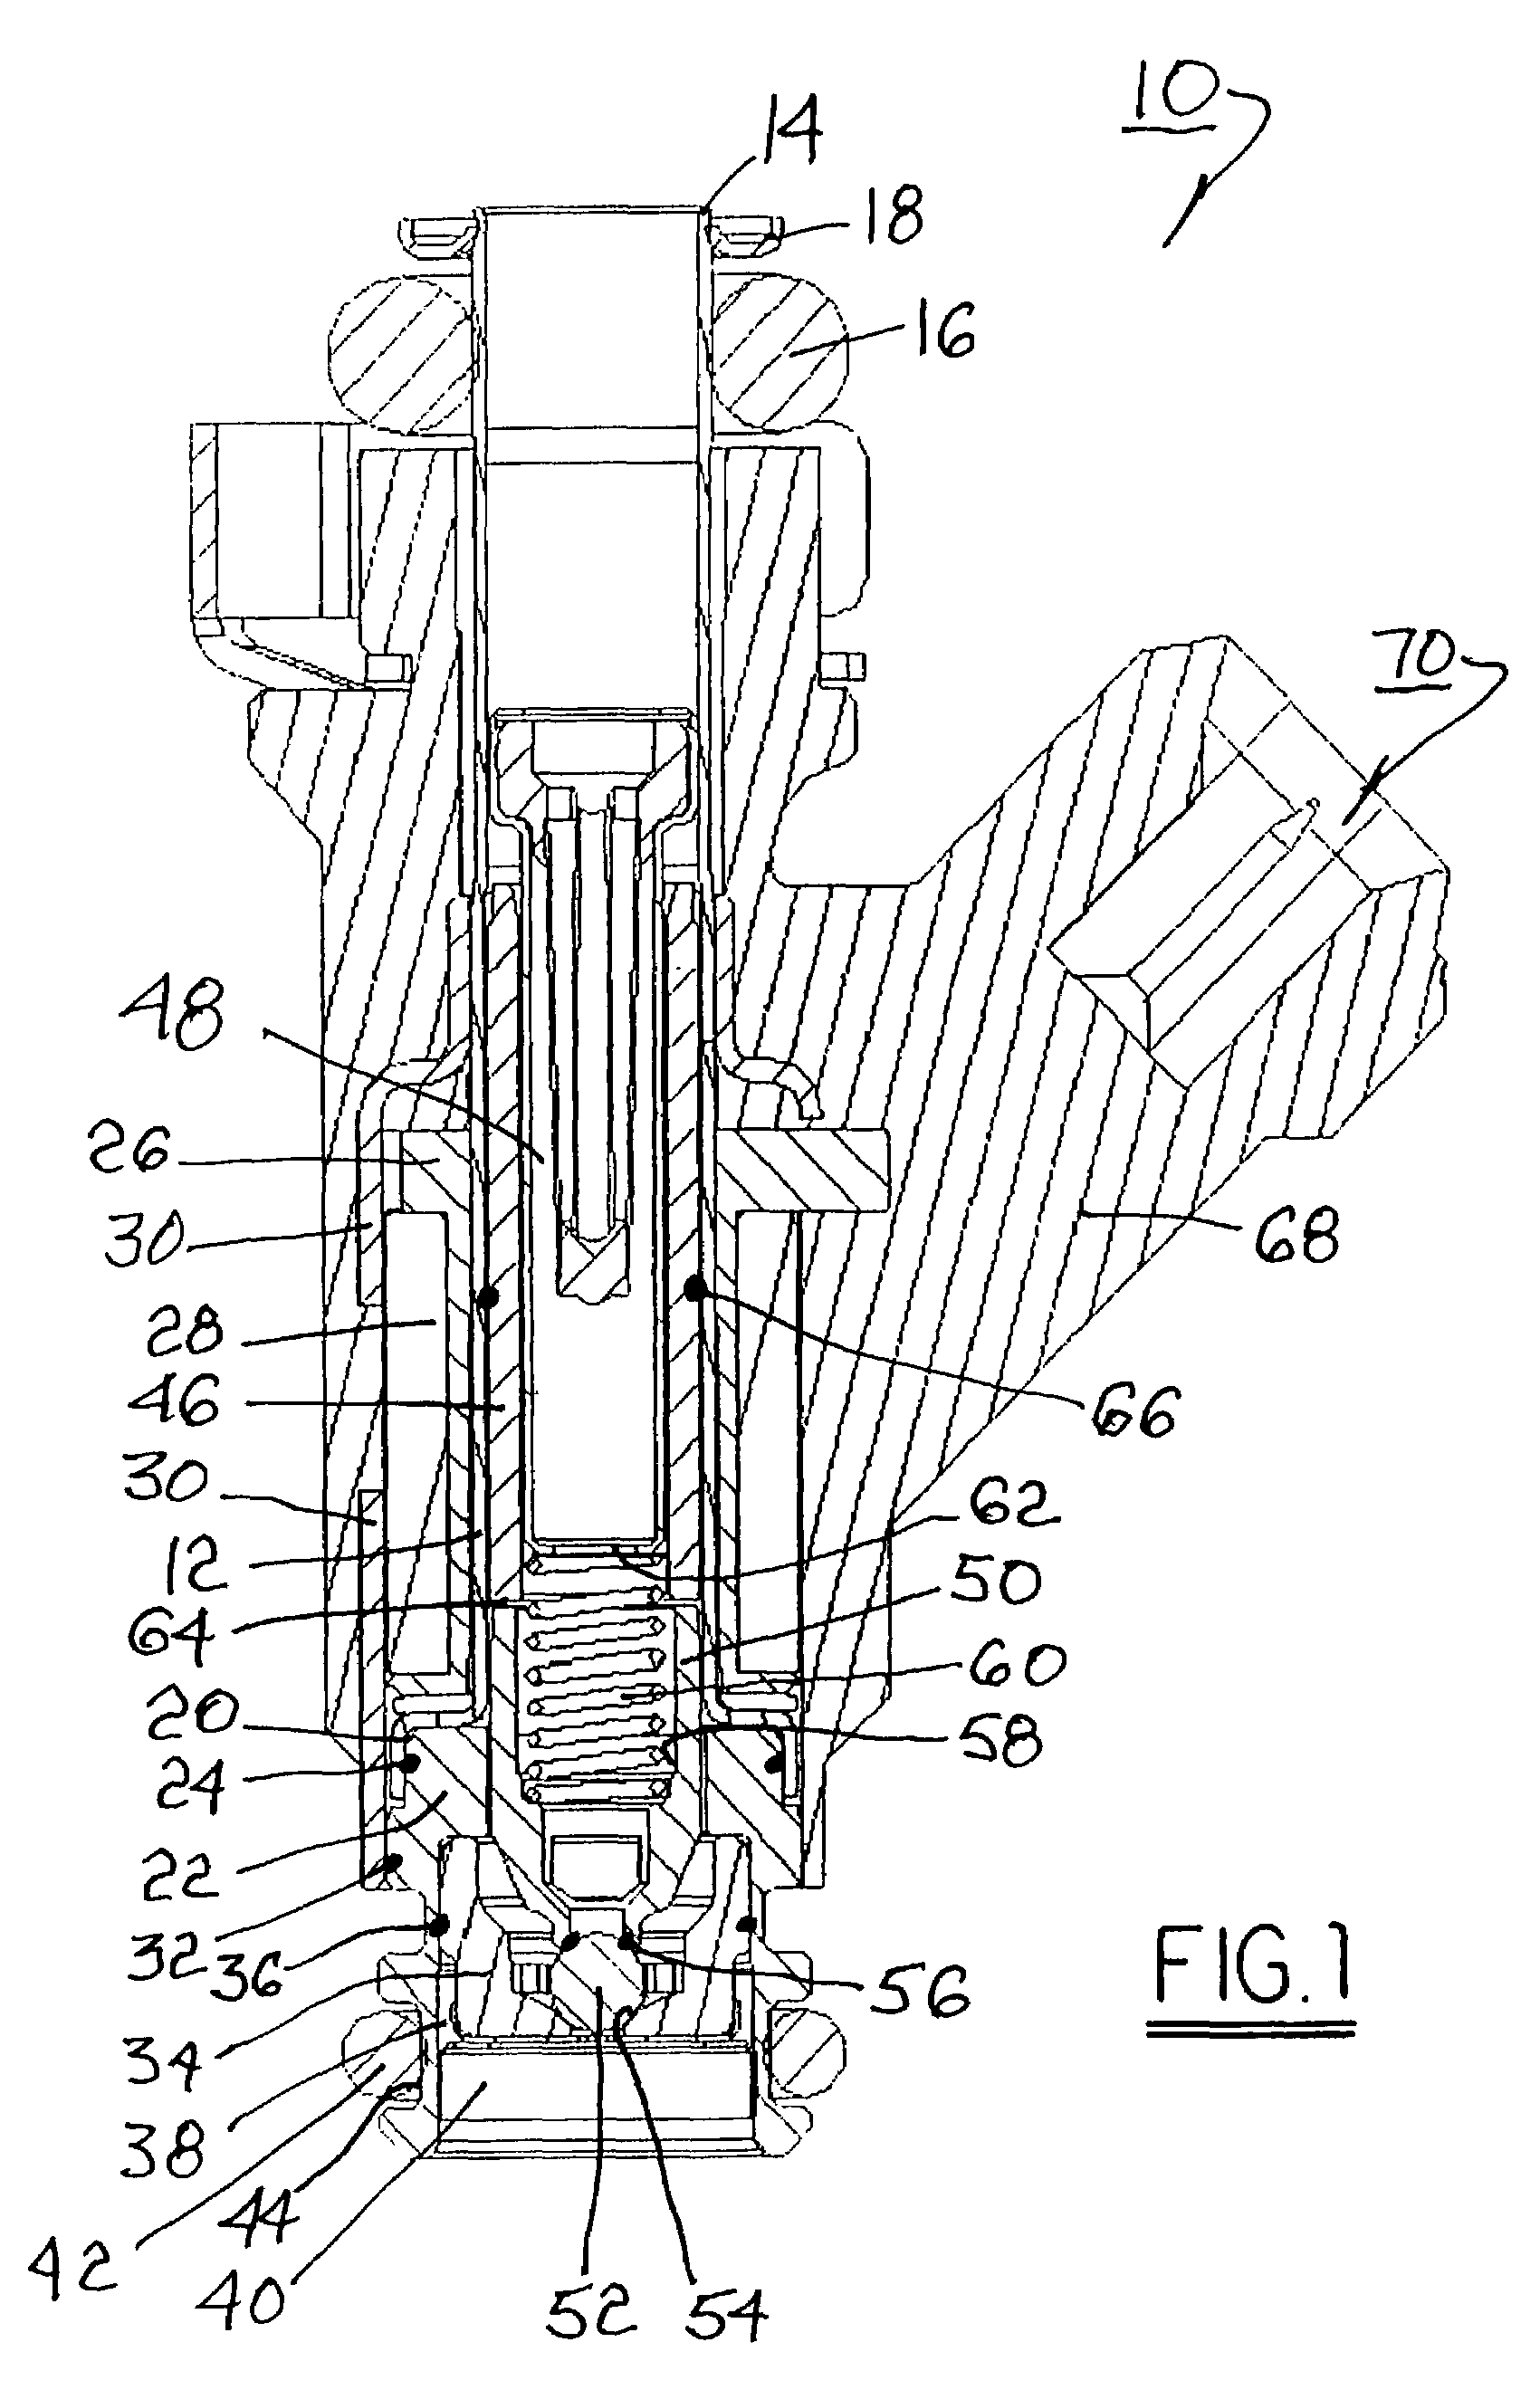 Solenoid-type fuel injector assembly having stabilized ferritic stainless steel components